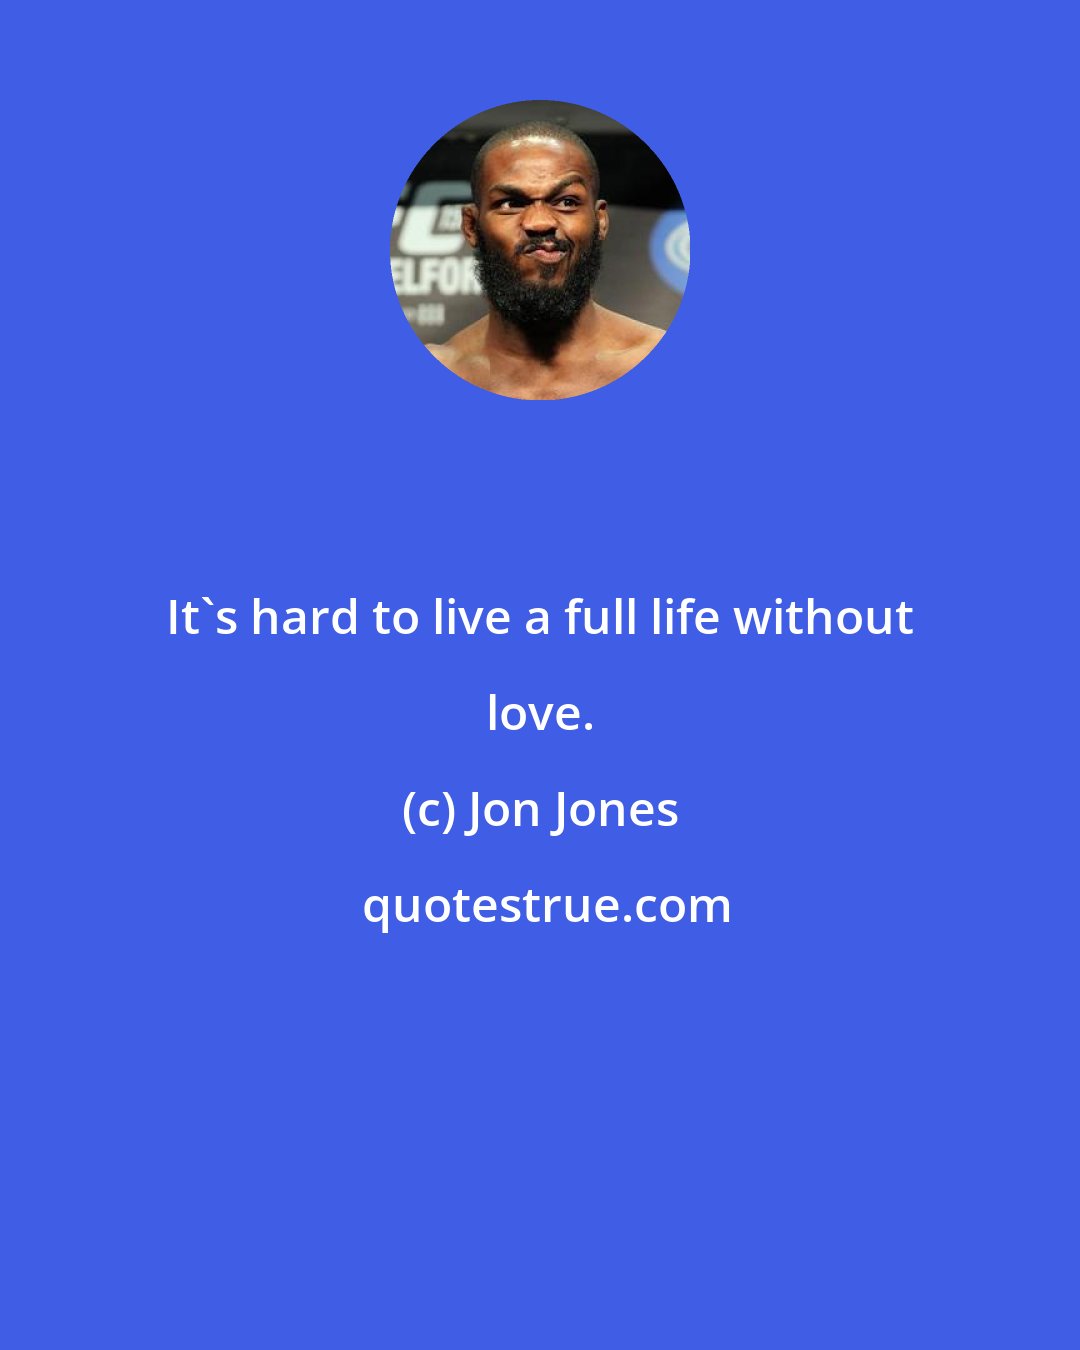 Jon Jones: It's hard to live a full life without love.